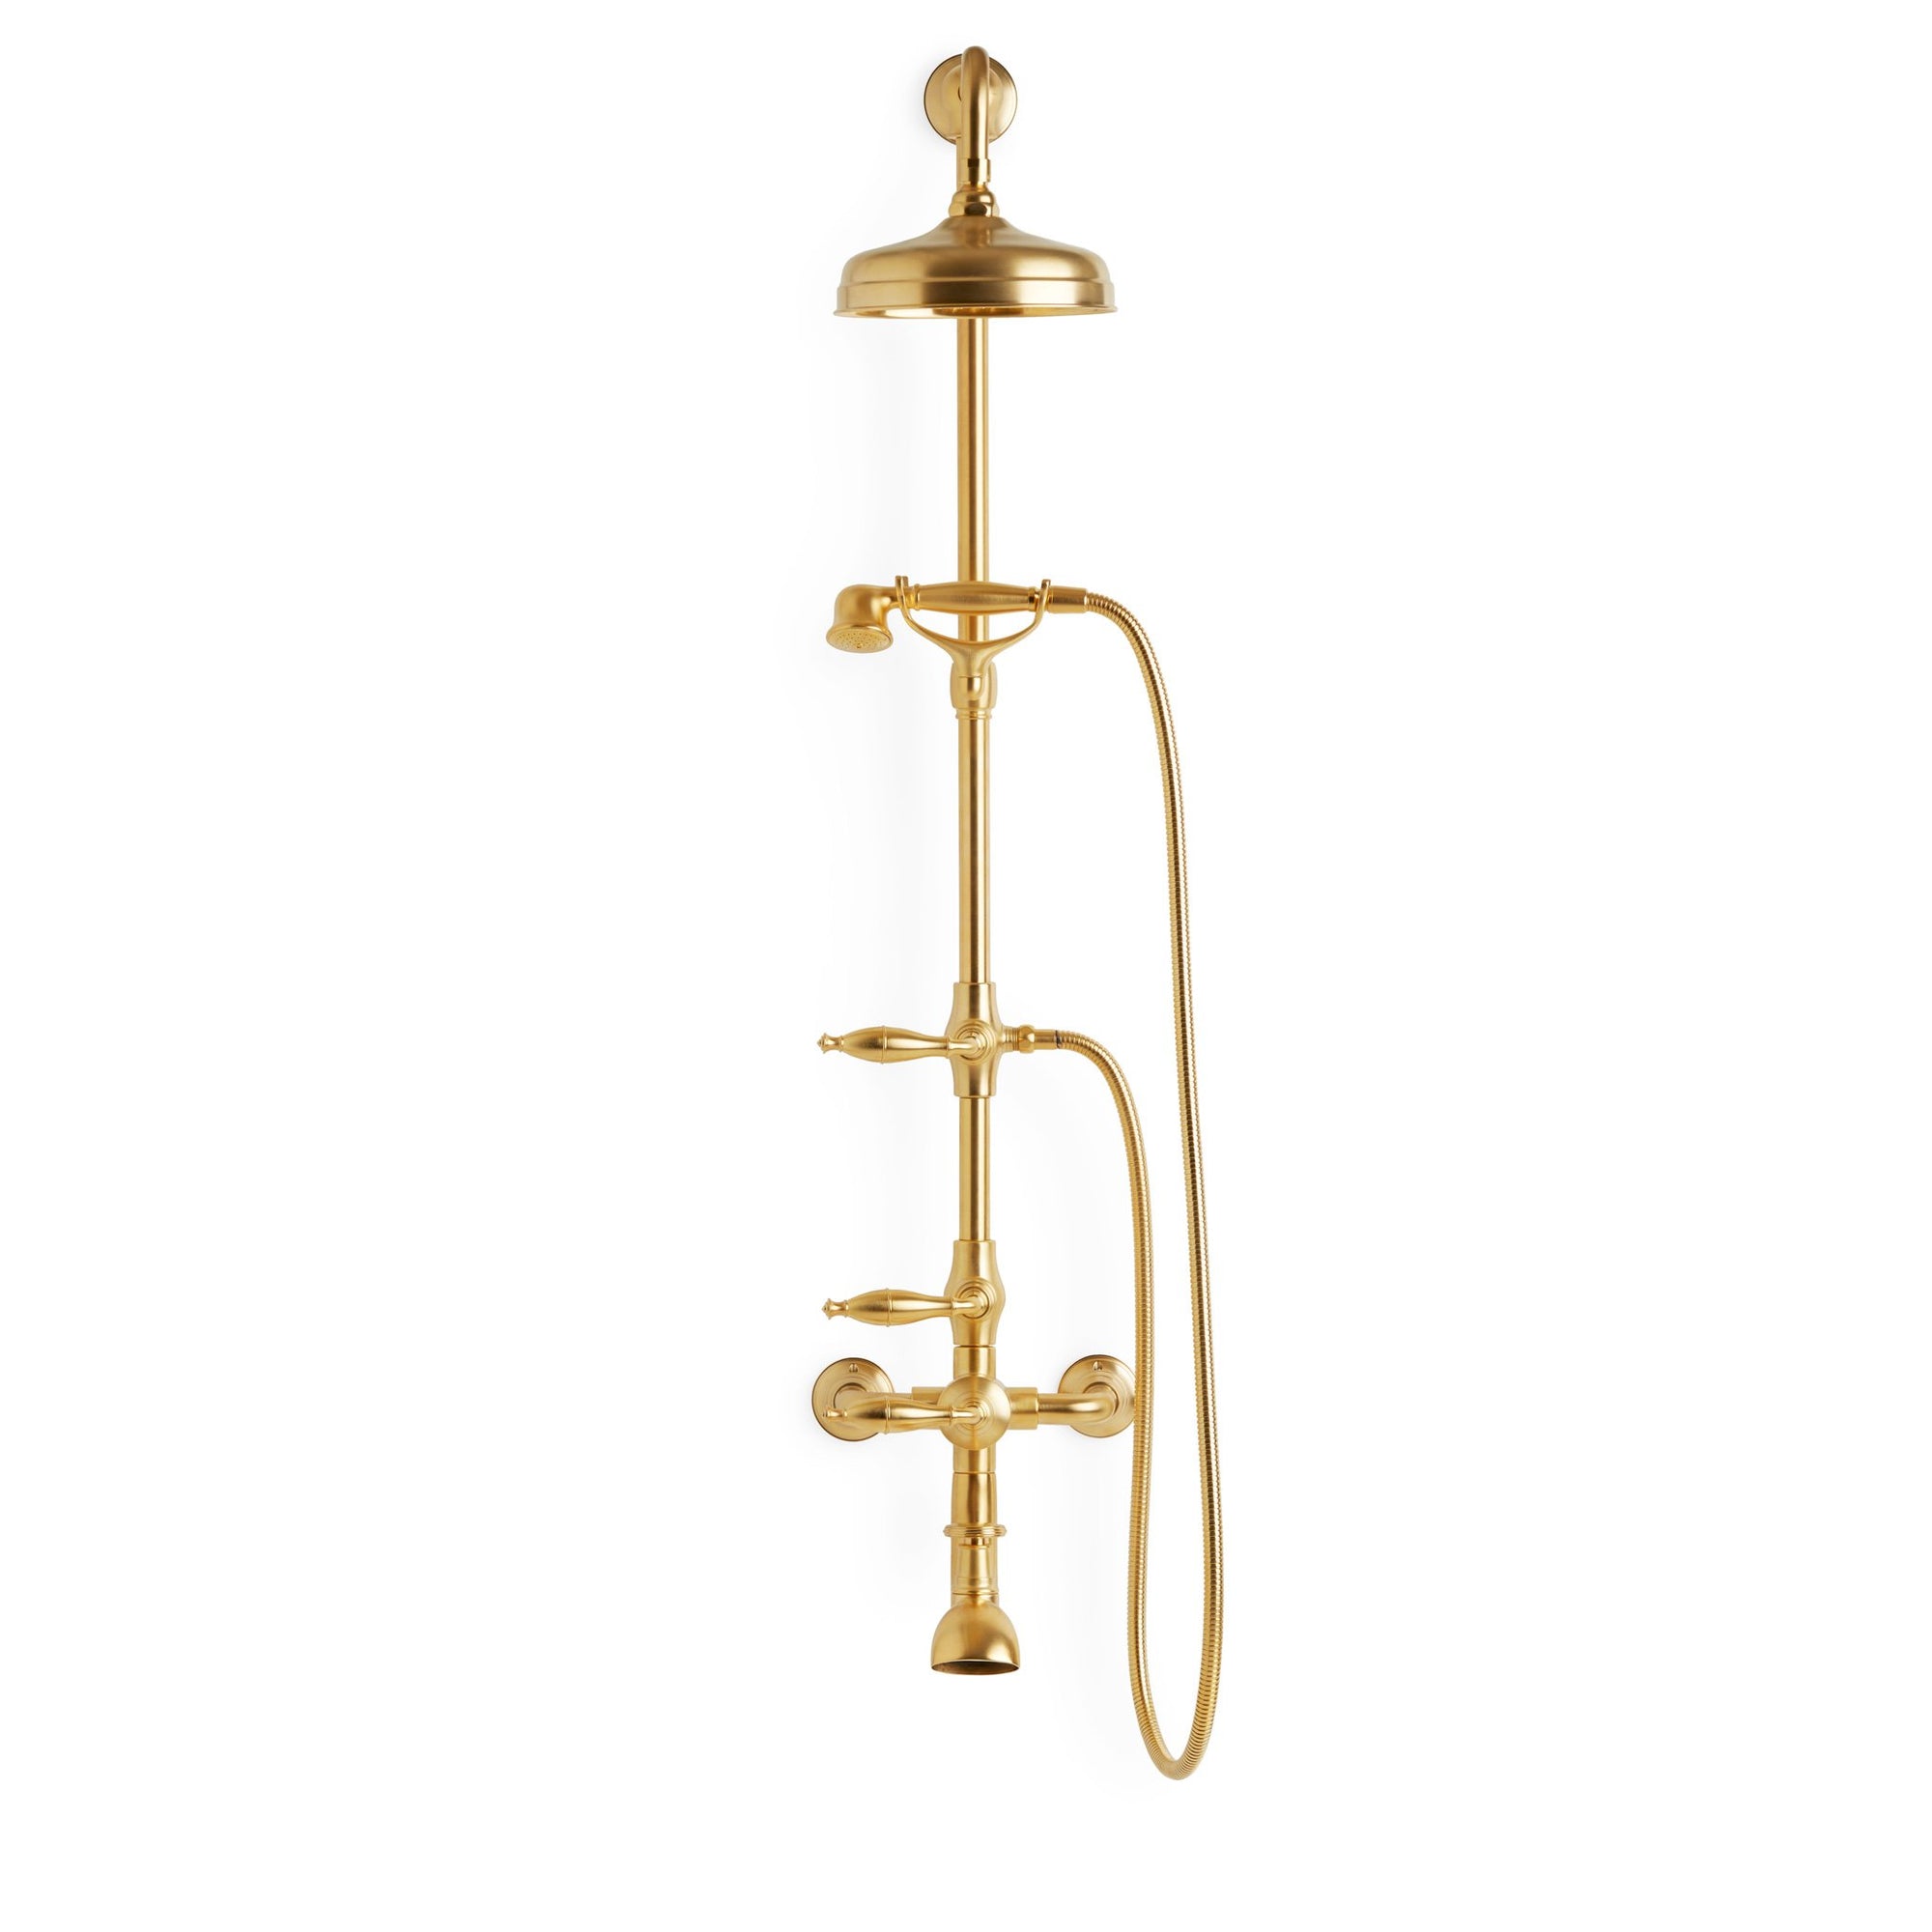 0990XSHR-GP Sherle Wagner International Grey Series I Lever Exposed Shower Set in Gold Plate metal finish